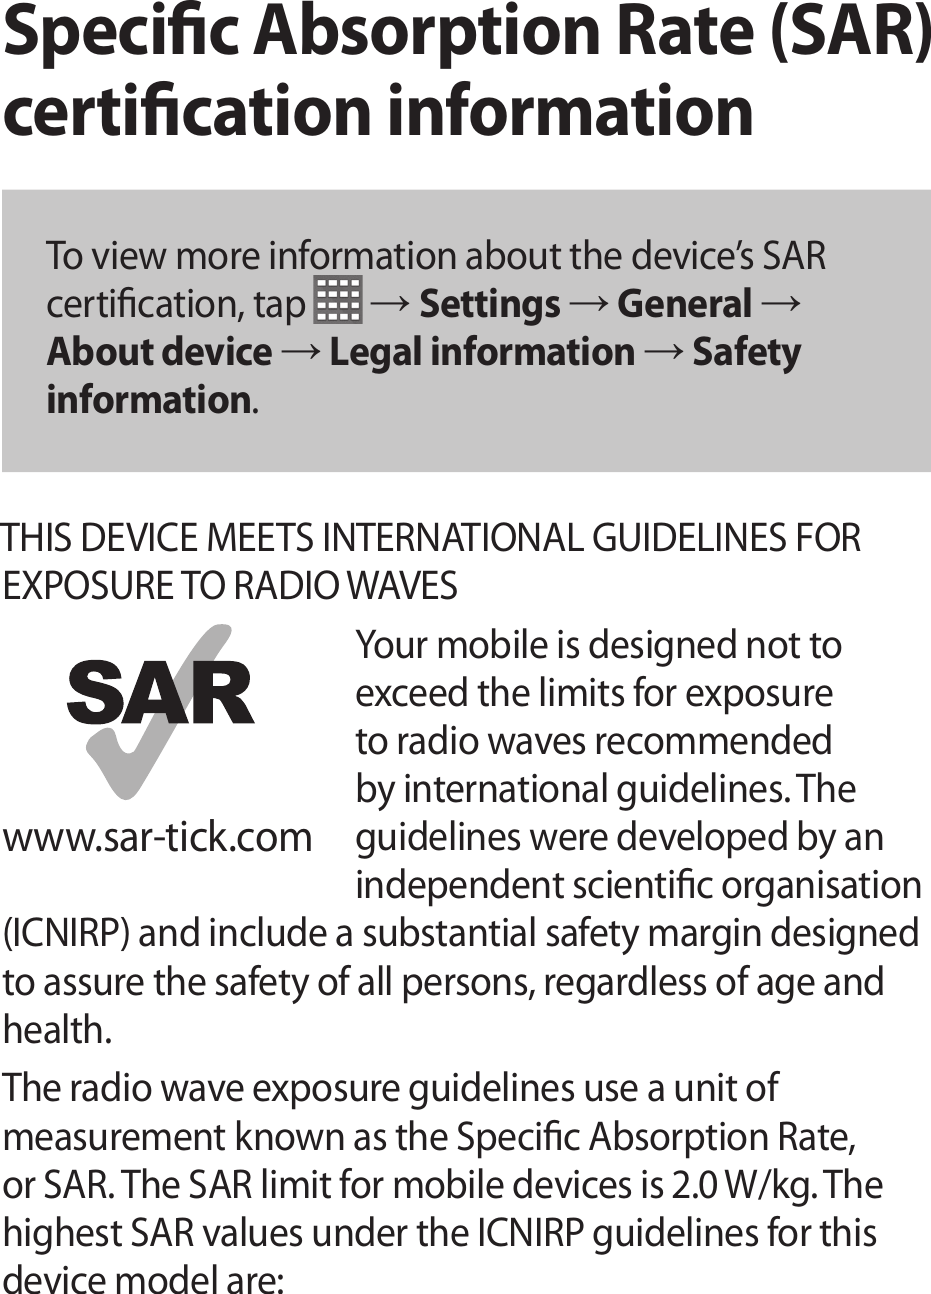 Specic Absorption Rate (SAR) certication informationTo view more information about the device’s SAR certication, tap   → Settings → General → About device → Legal information → Safety information.THIS DEVICE MEETS INTERNATIONAL GUIDELINES FOR EXPOSURE TO RADIO WAVESYour mobile is designed not to exceed the limits for exposure to radio waves recommended by international guidelines. The guidelines were developed by an independent scientic organisation (ICNIRP) and include a substantial safety margin designed to assure the safety of all persons, regardless of age and health.The radio wave exposure guidelines use a unit of measurement known as the Specic Absorption Rate, or SAR. The SAR limit for mobile devices is 2.0 W/kg. The highest SAR values under the ICNIRP guidelines for this device model are:www.sar-tick.com